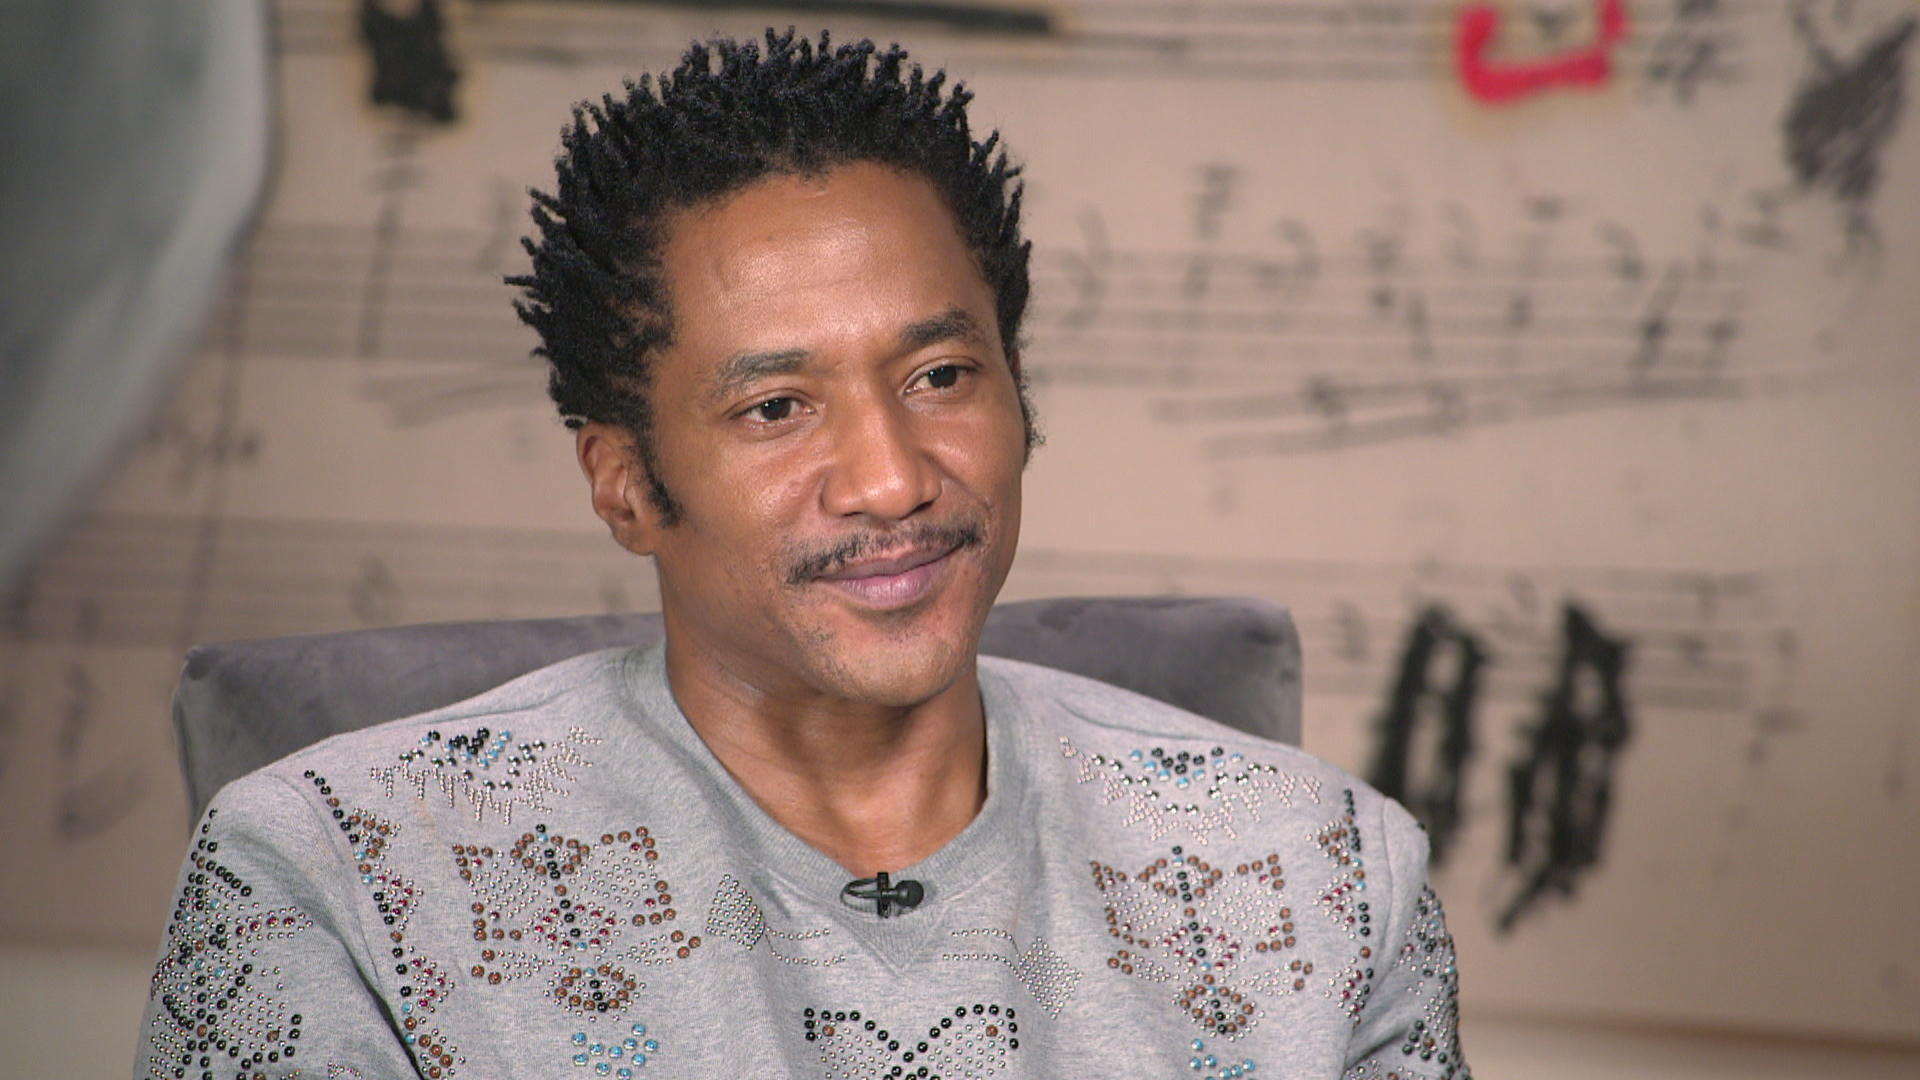 Hip hop legend Q-Tip on A Tribe Quest's new album and honoring member, Phife Dawg - CBS News